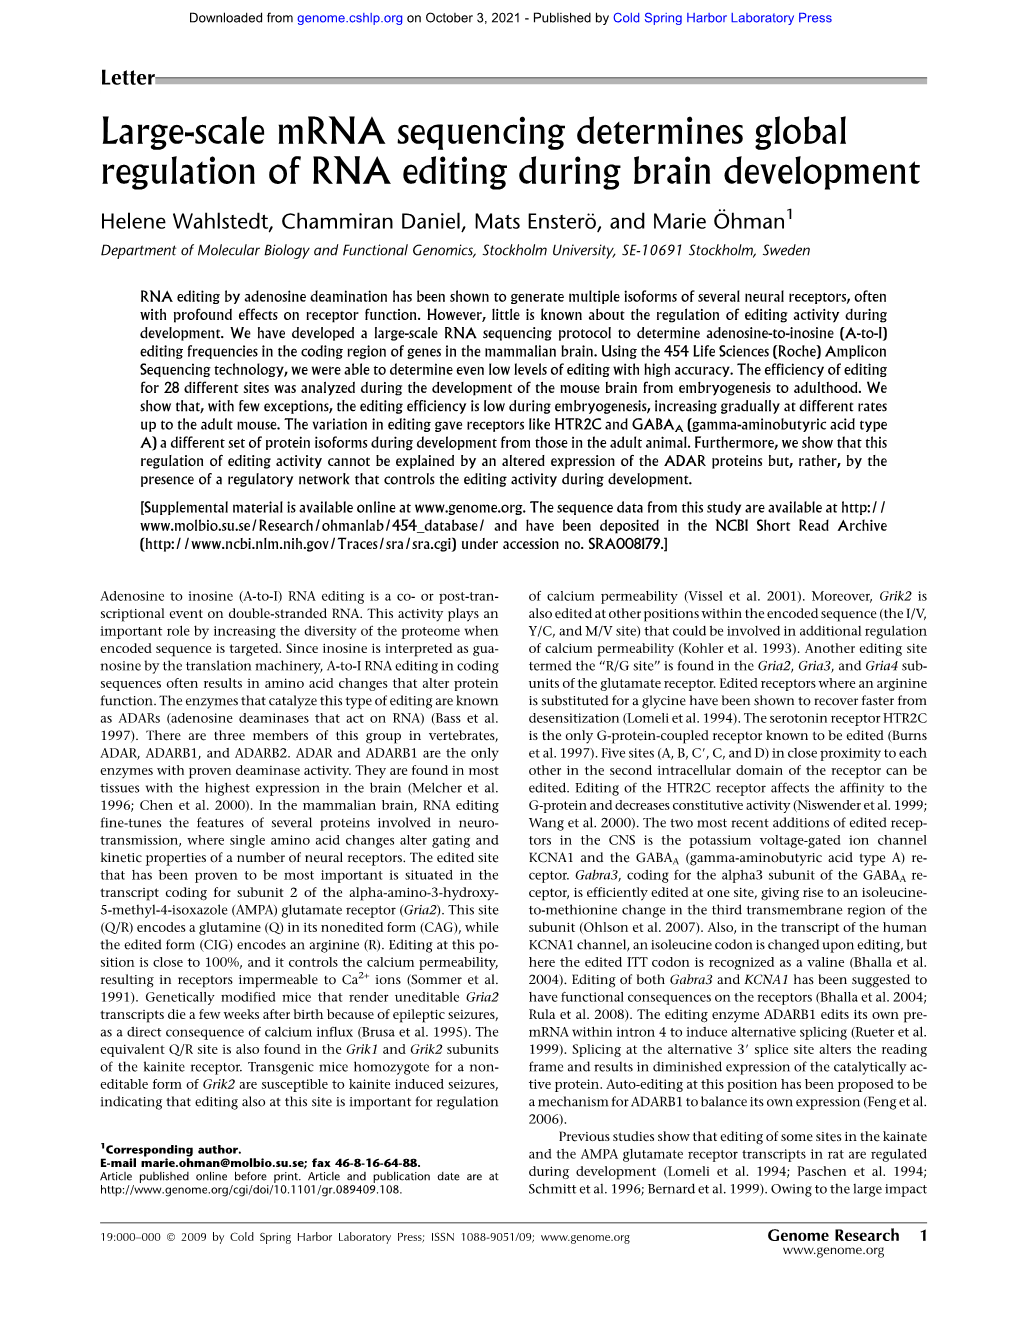 Large-Scale Mrna Sequencing Determines Global Regulation of RNA Editing During Brain Development